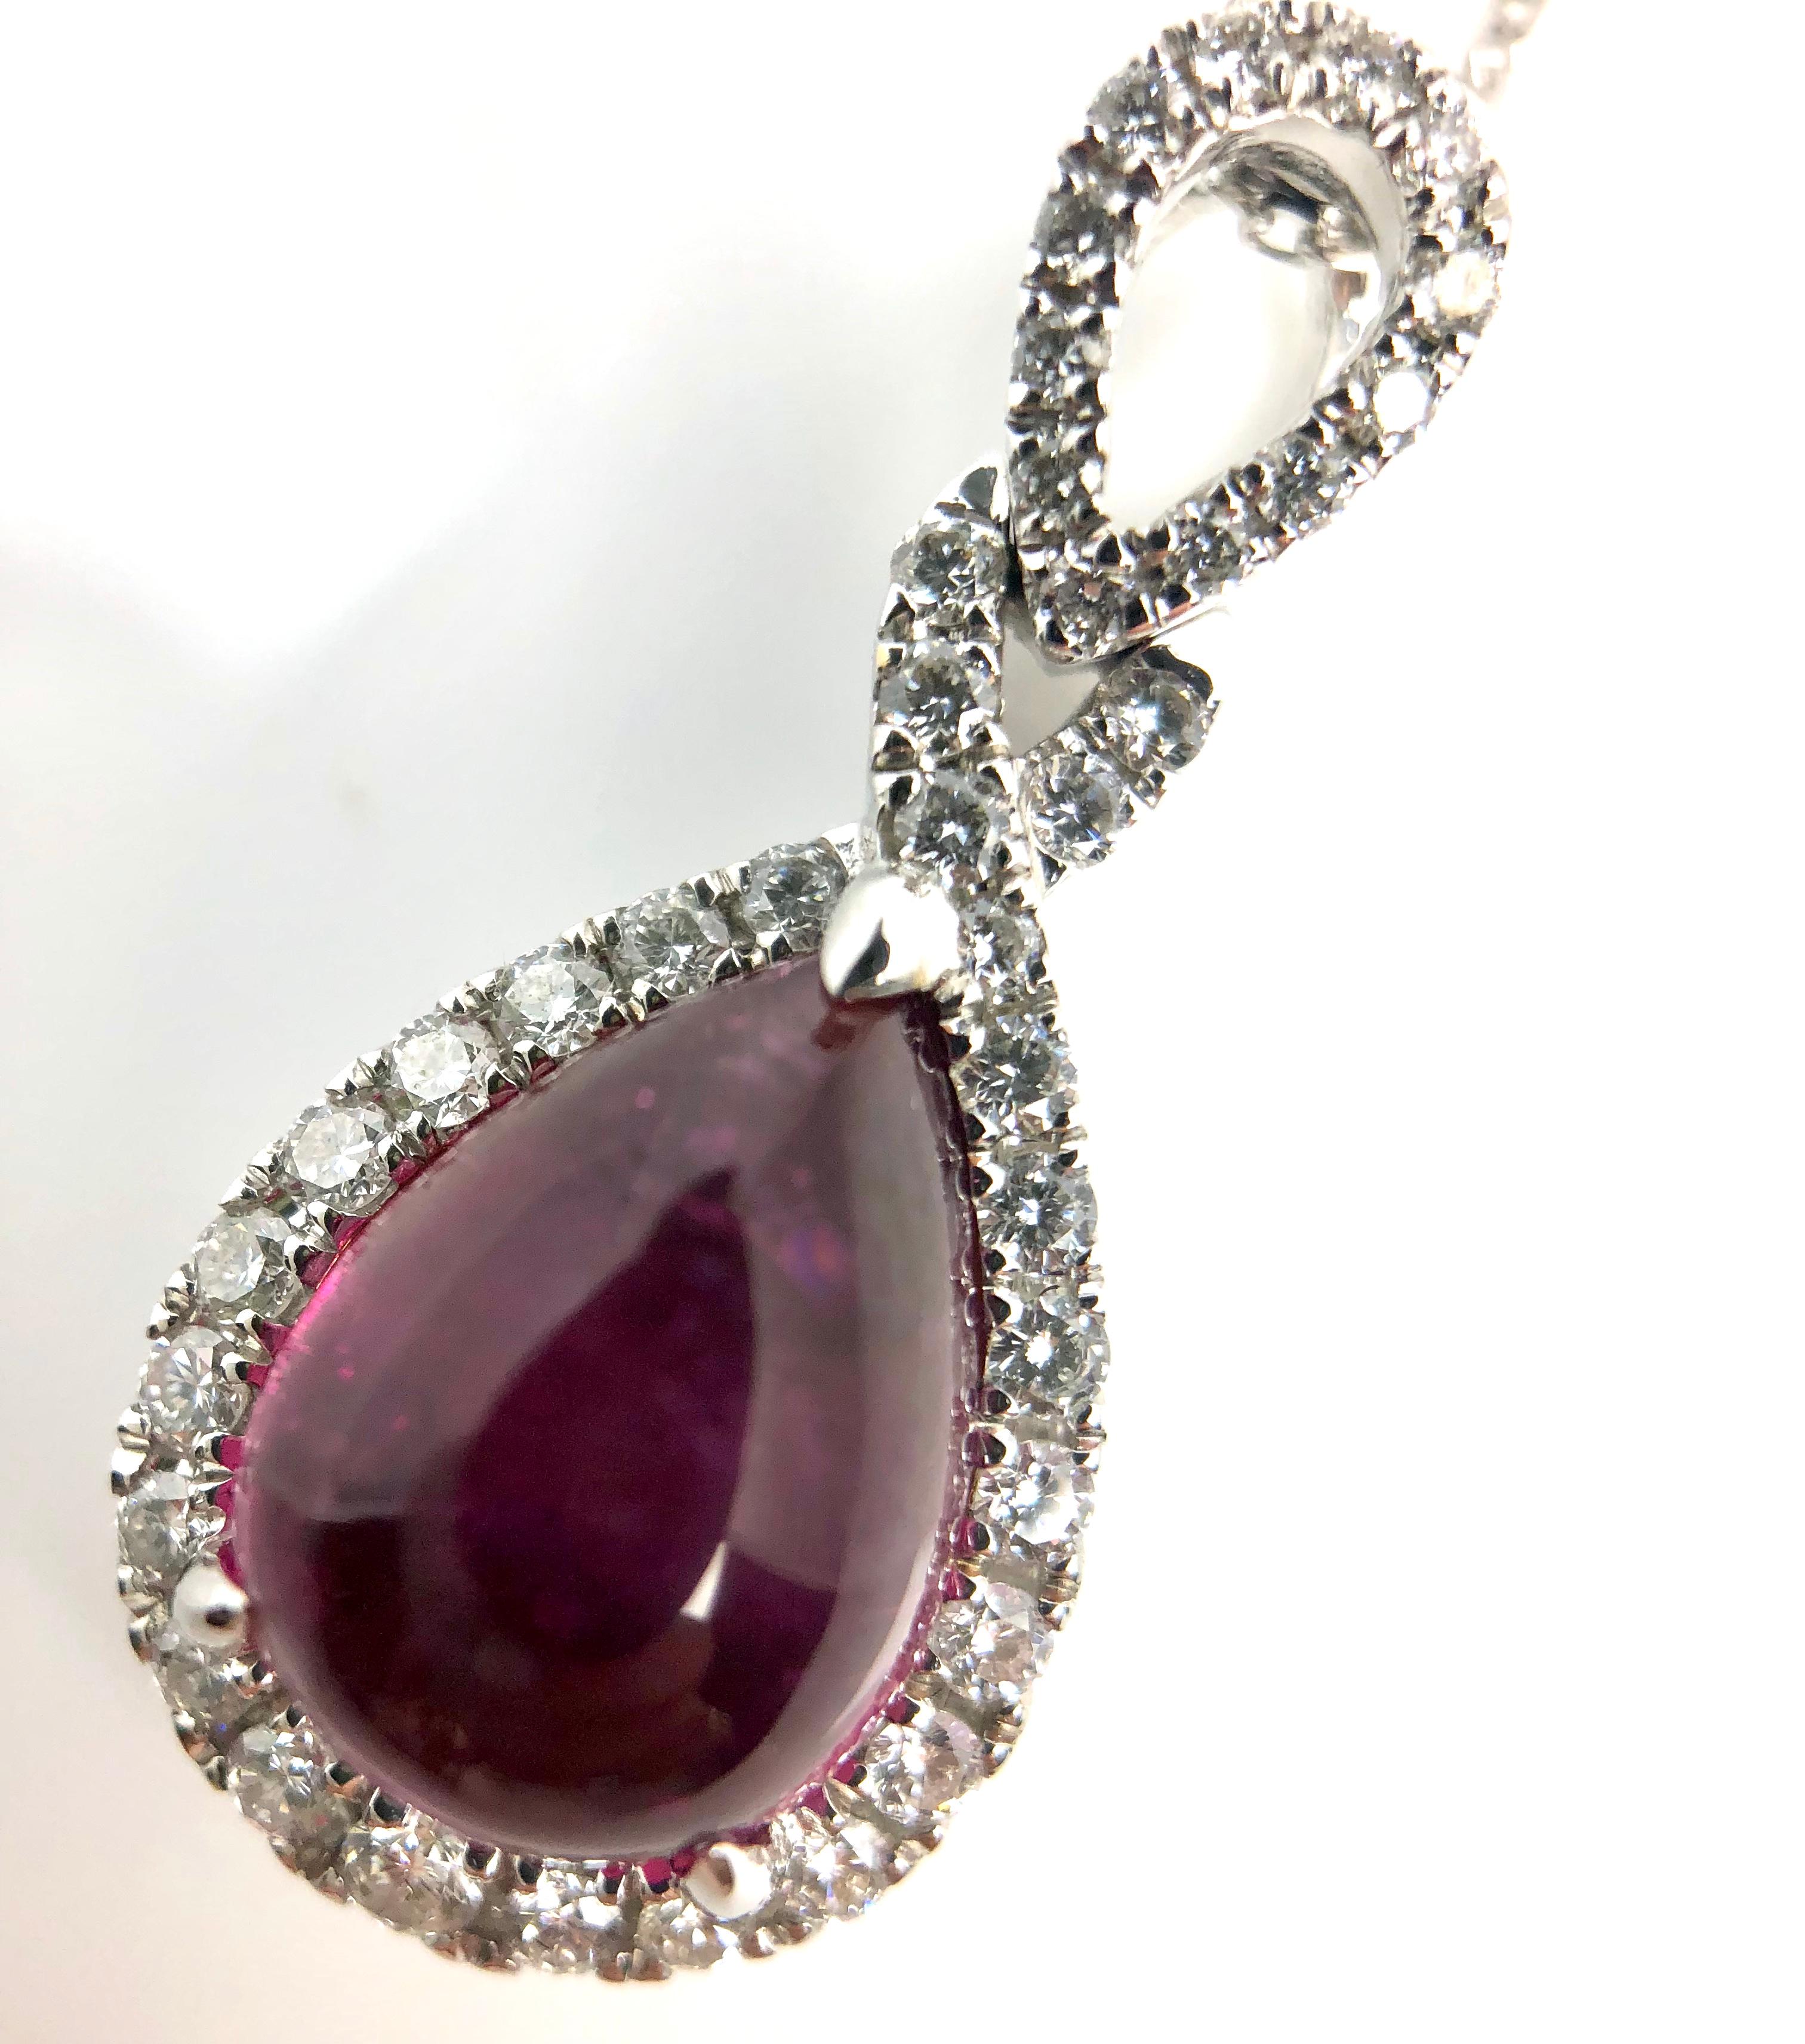 This lovely halo pendant features 3.15 carats Pear Shape Rubelite, surrounded by a halo of round white diamonds.

Center: 3.15 carats Rubelite
Diamond Halo: 38 round diamonds total 0.34 carats
Set in 18k White Gold.

Many of our items have matching